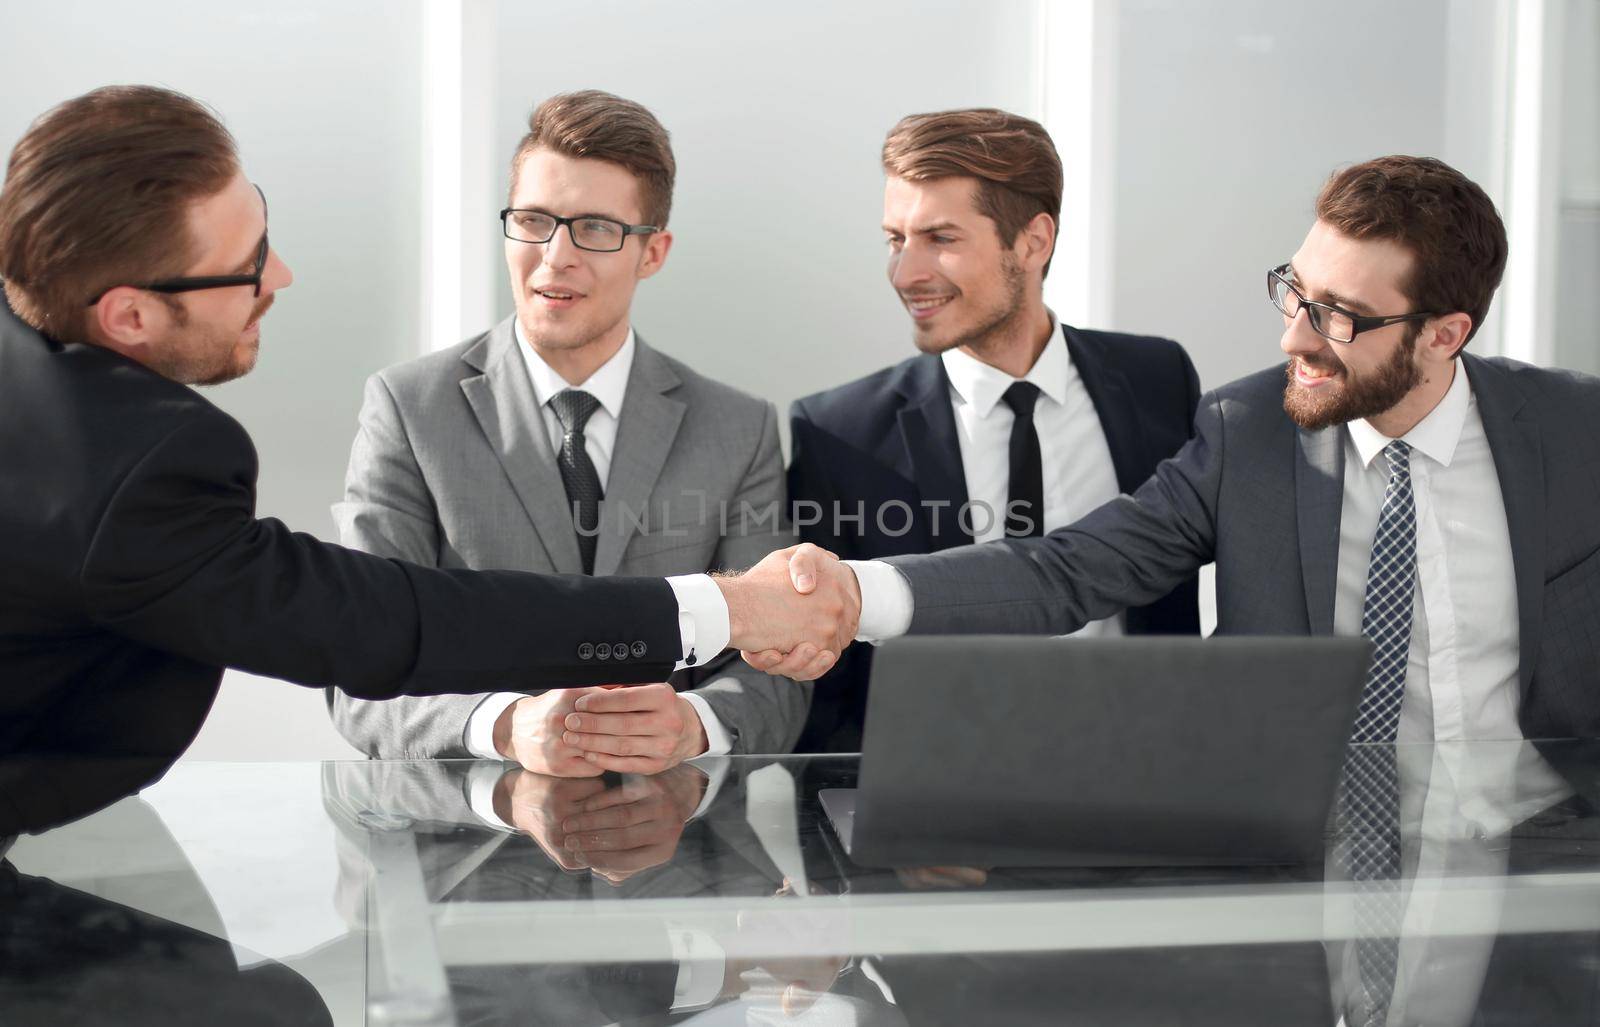 employees greet each other with a handshake by asdf